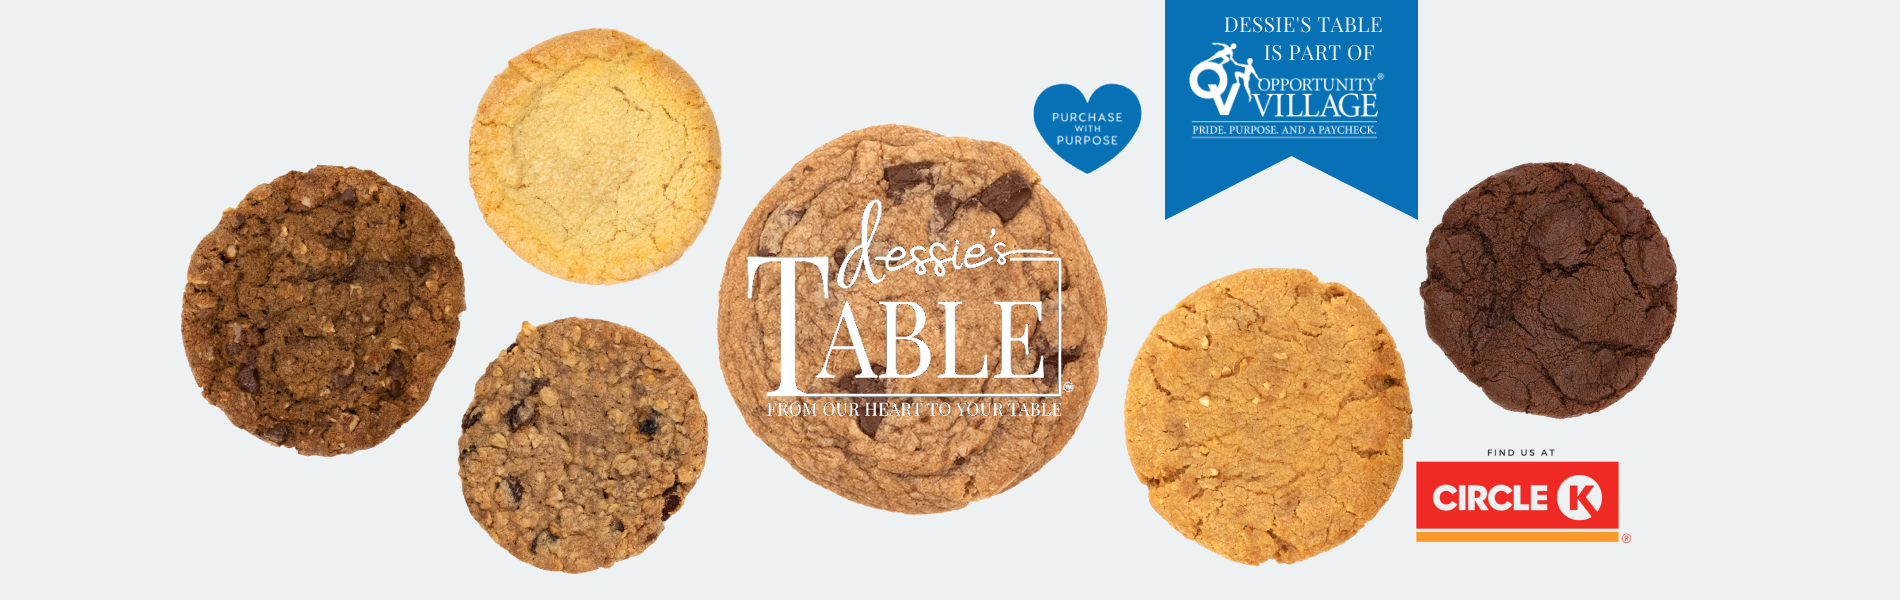 Dessie's Table wholesale cookies logo with cookies in the background.